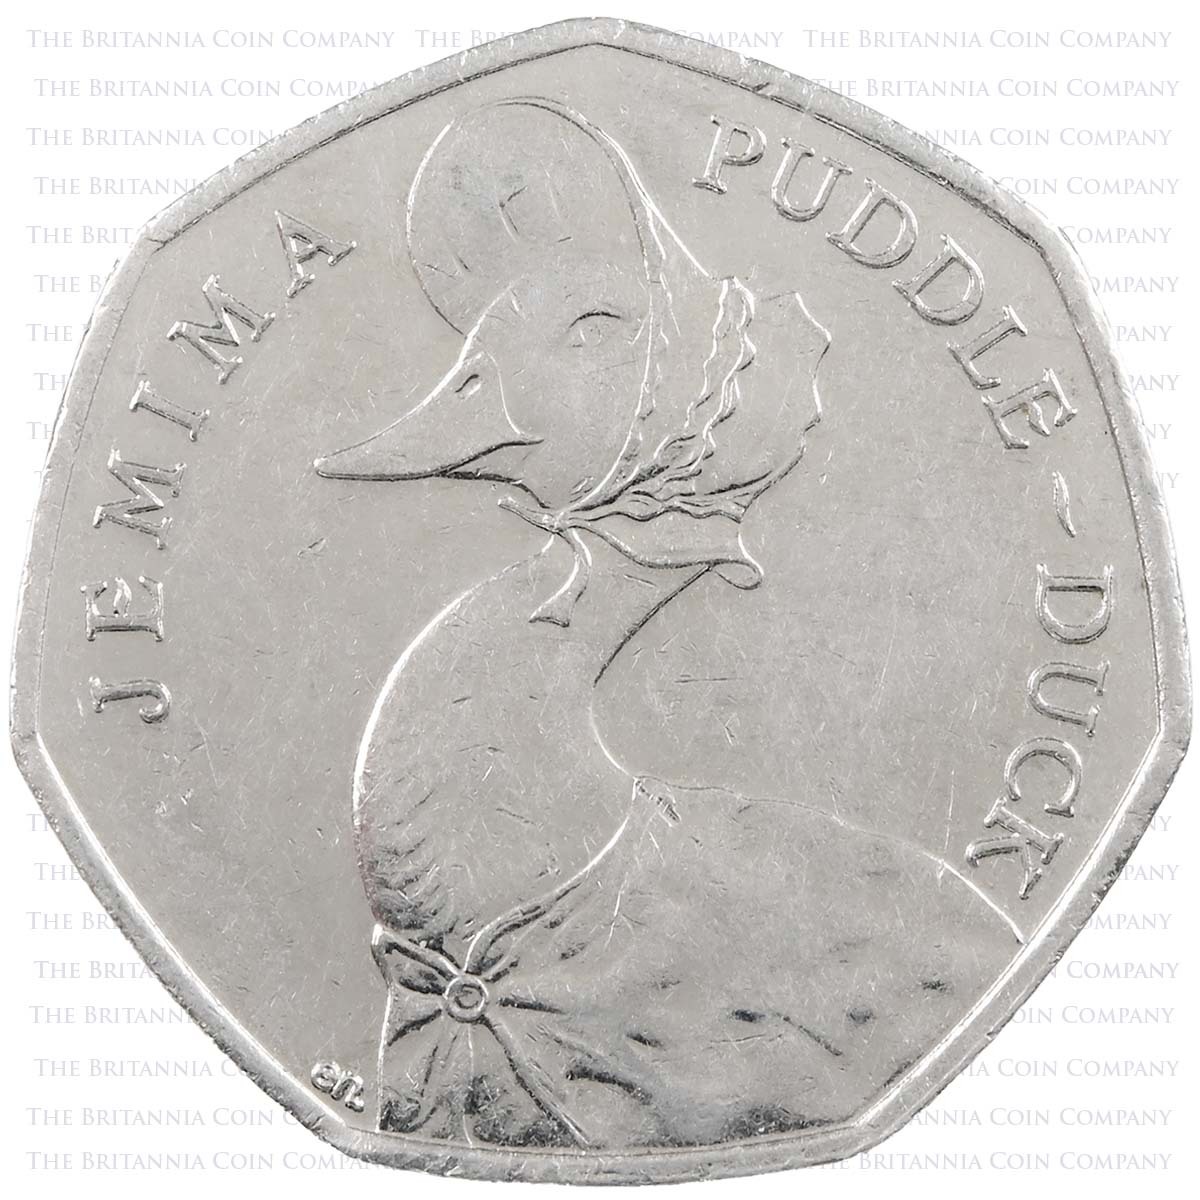 2016 Beatrix Potter Jemima Puddle-Duck Circulated Fifty Pence Coin Reverse